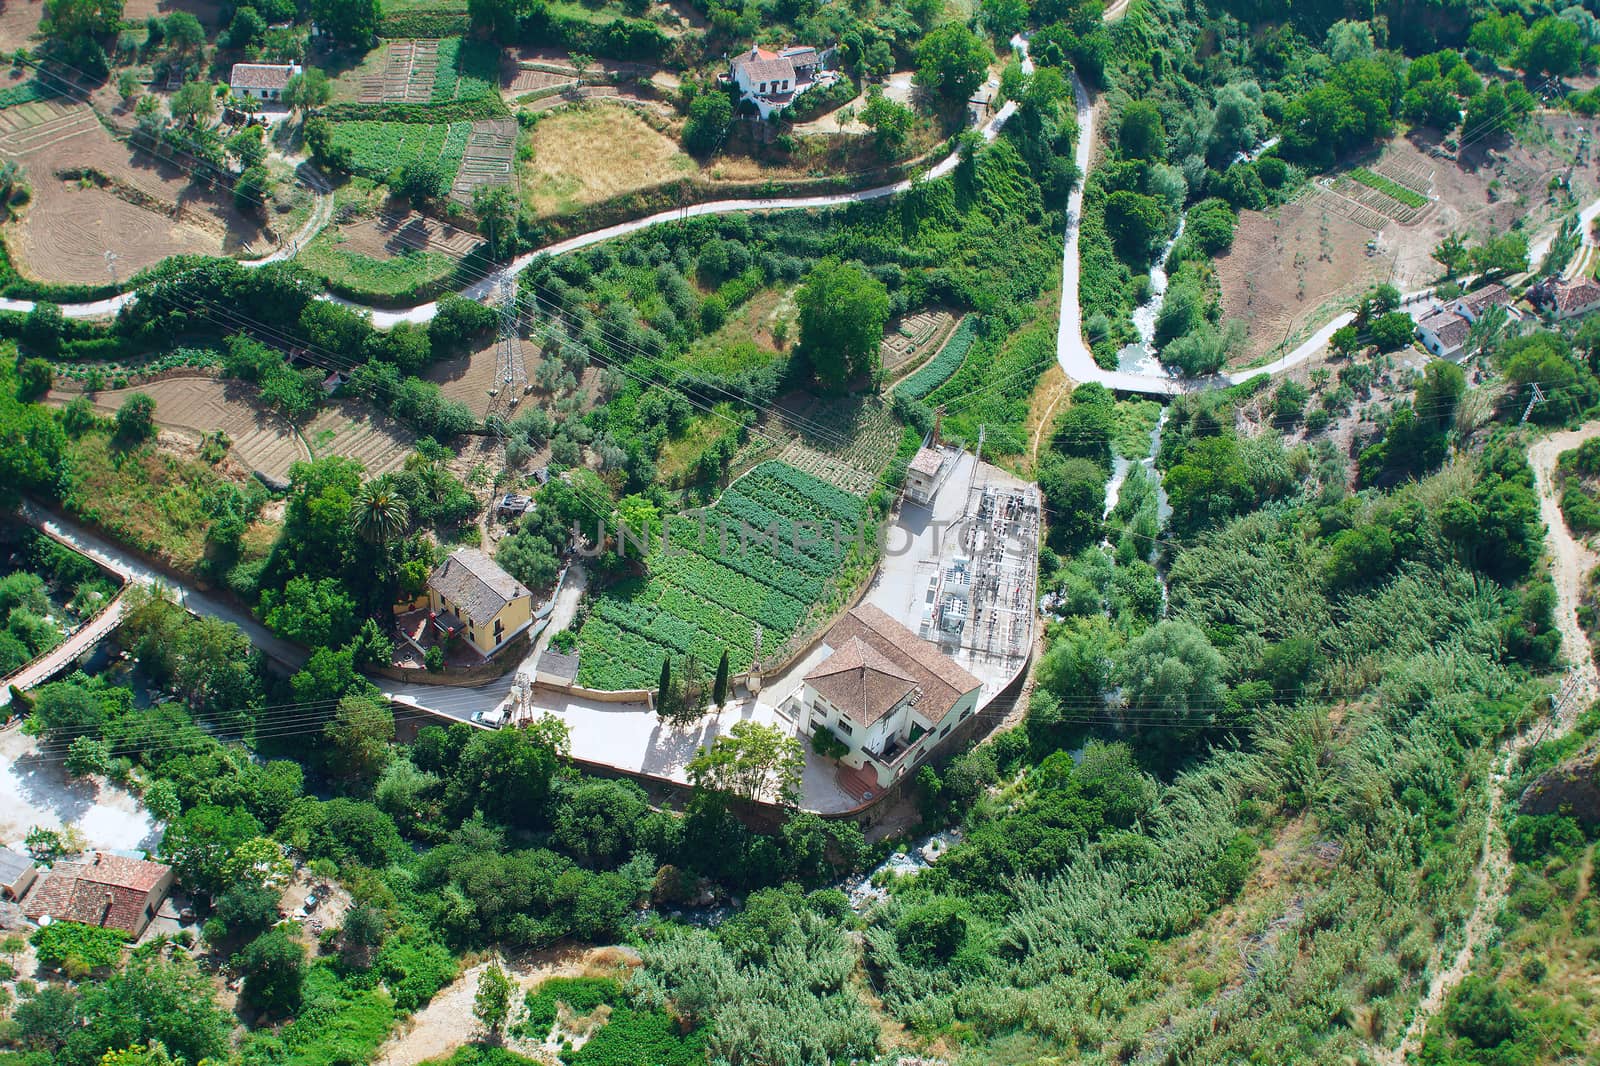 Top view of a village in Andalusia